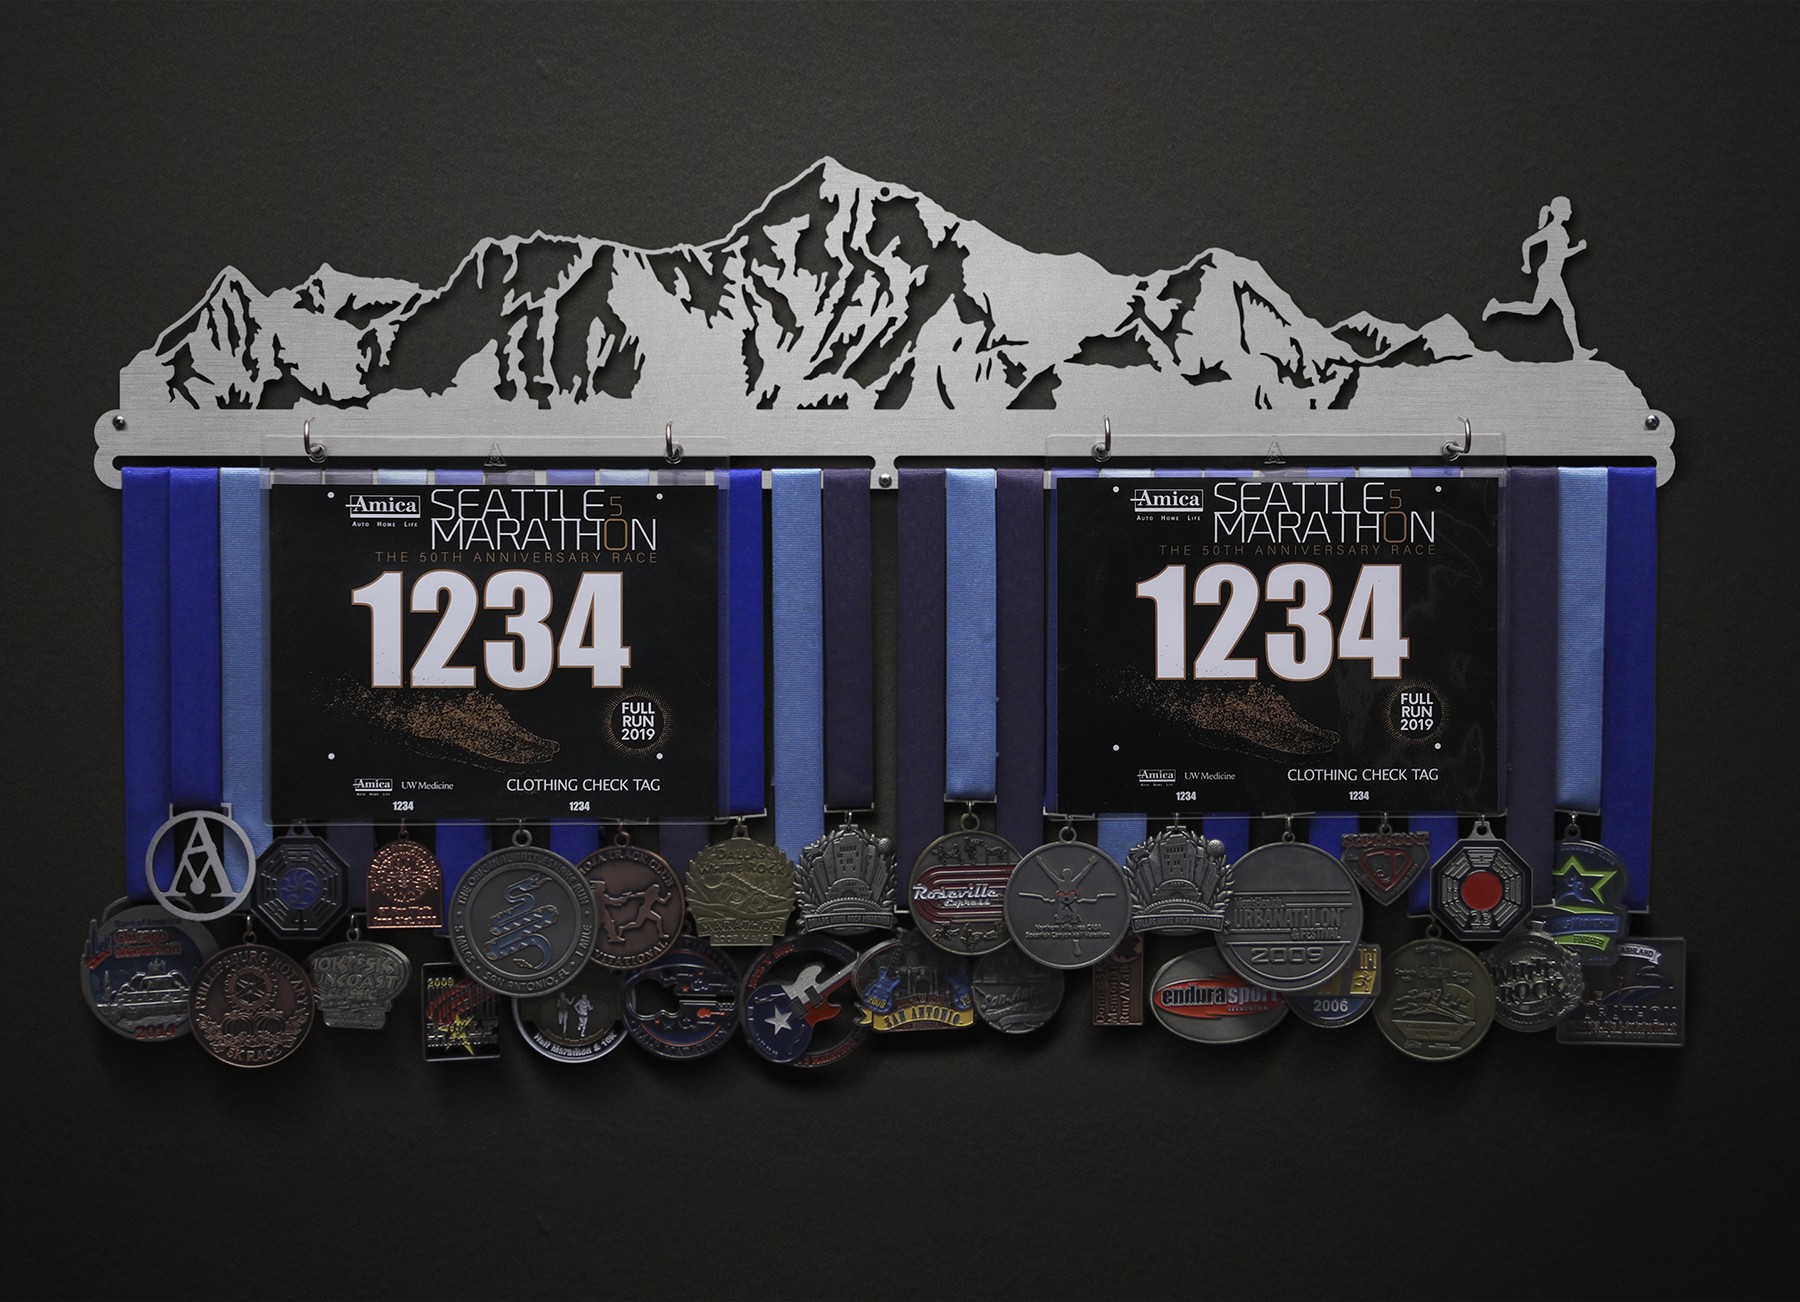 Mountainscape - Female - Version 2 Bib and Medal Display